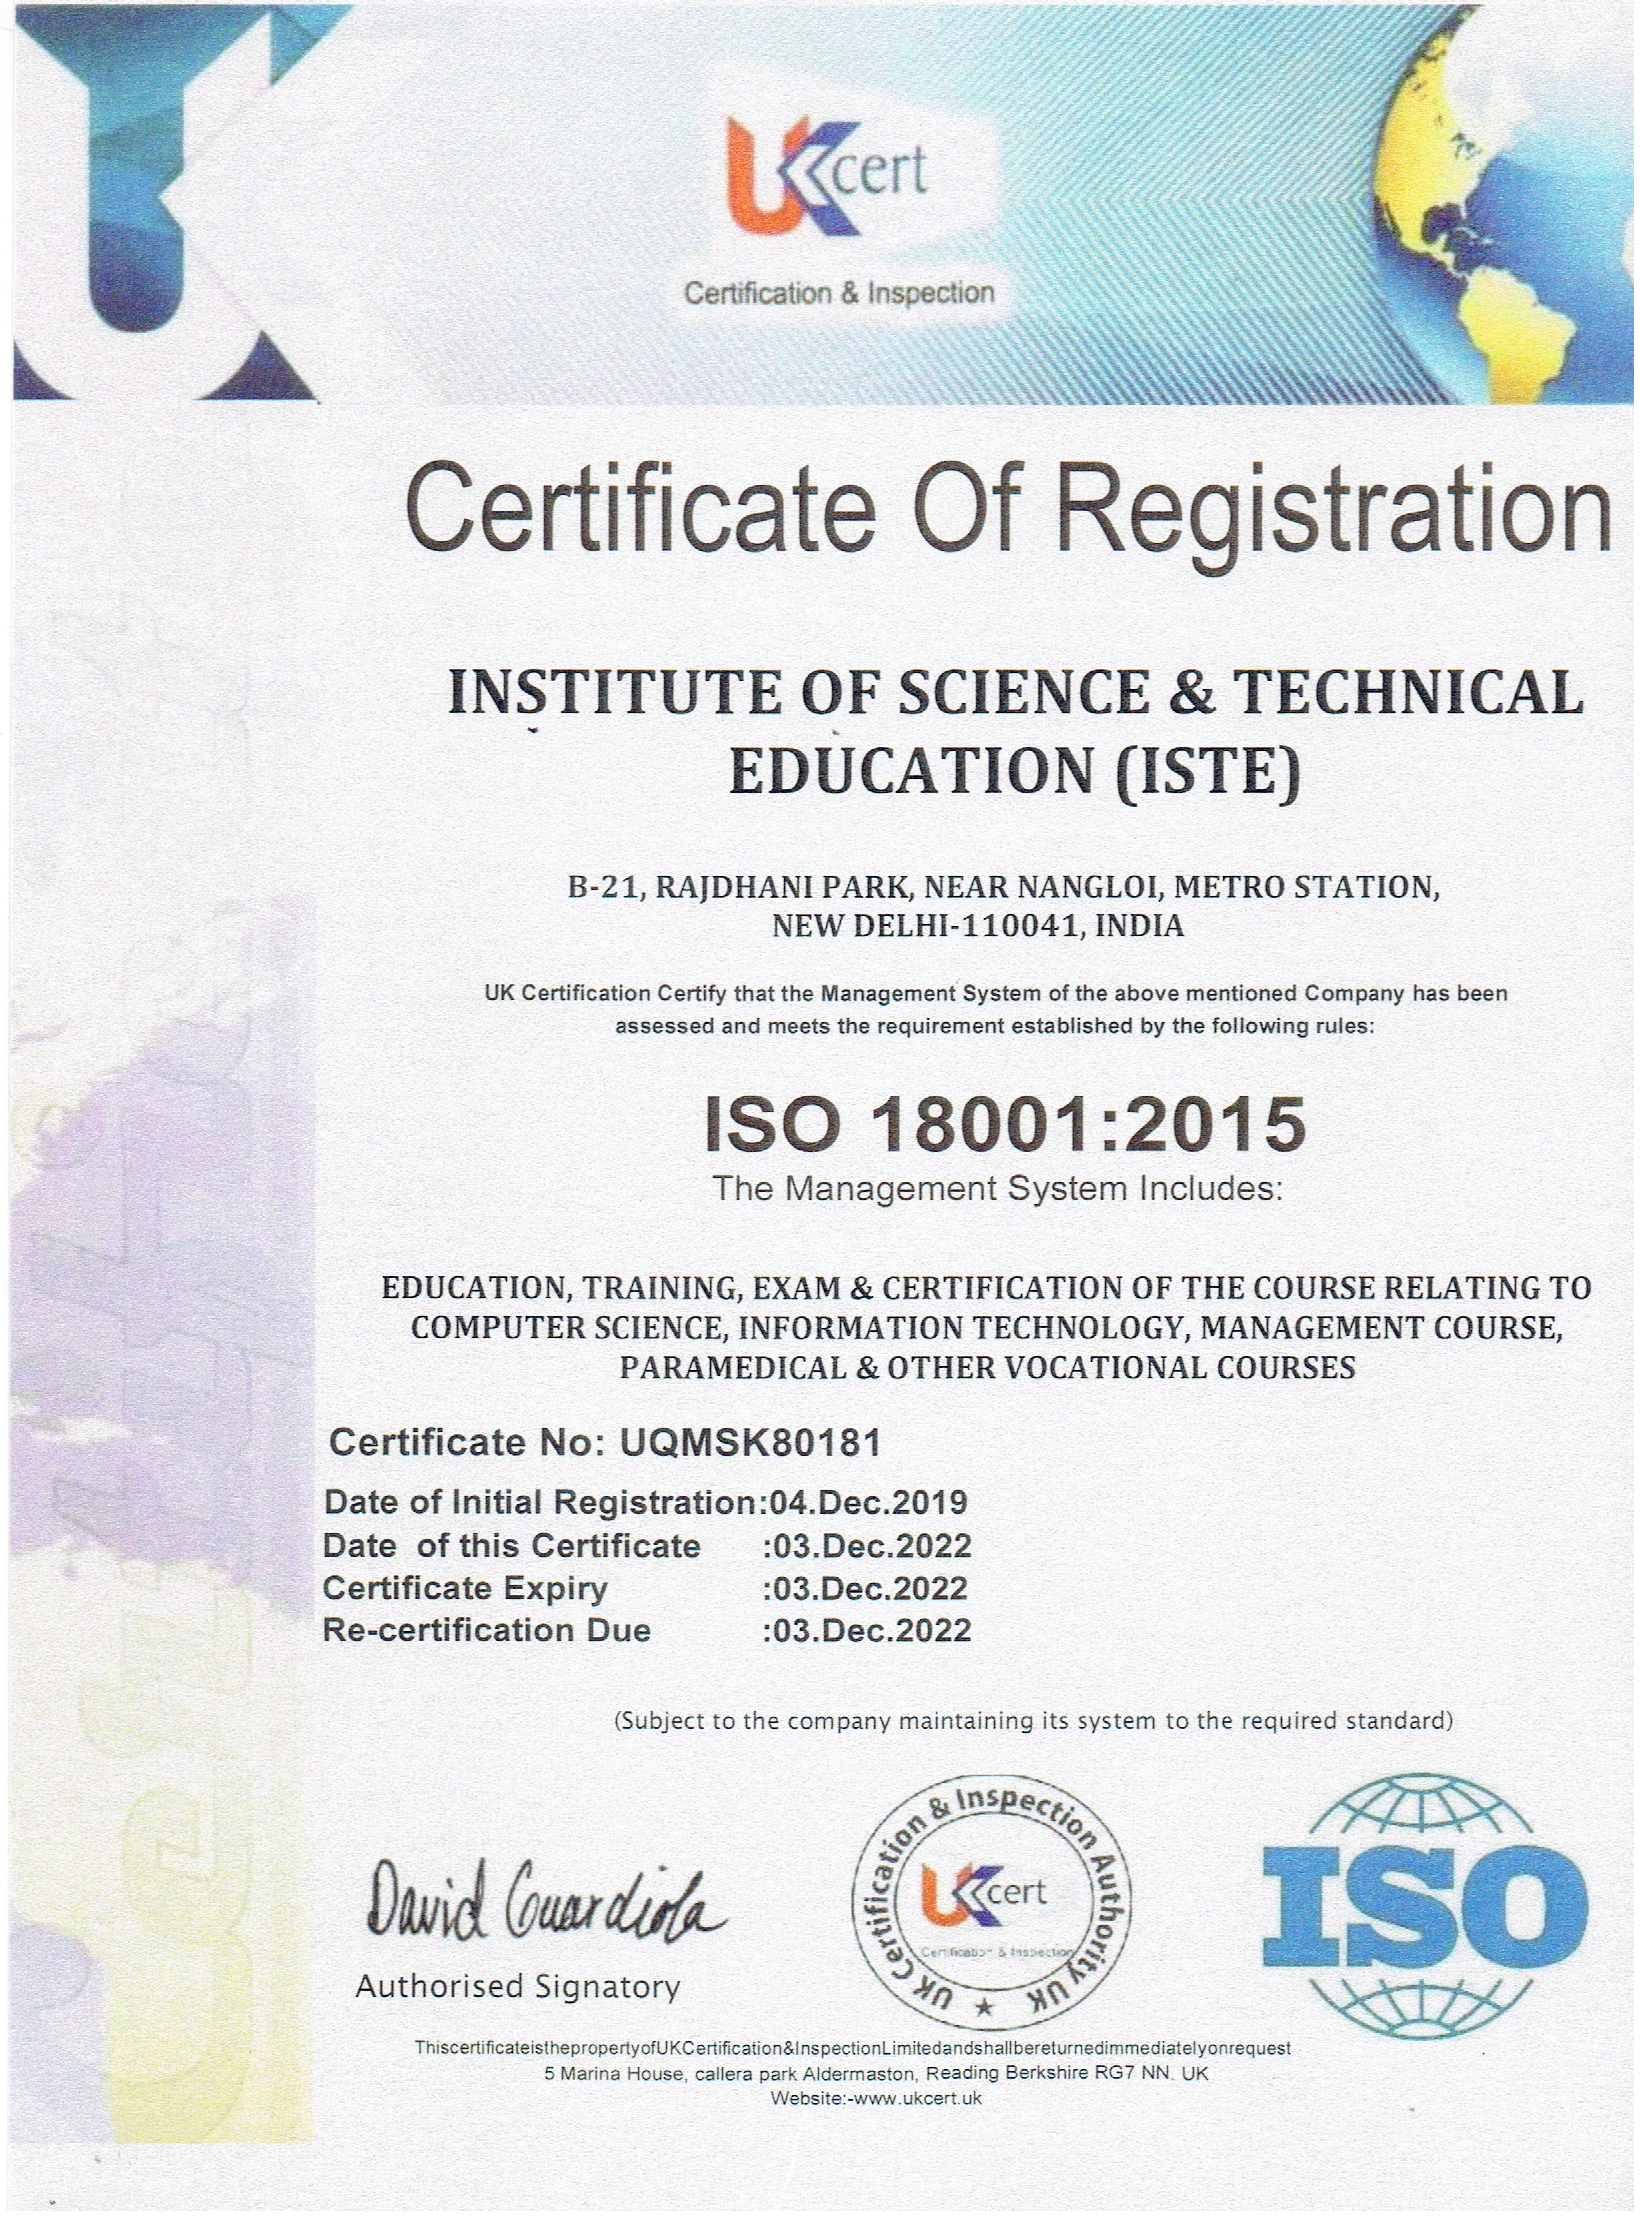 ISO 18001:2015 Certificate